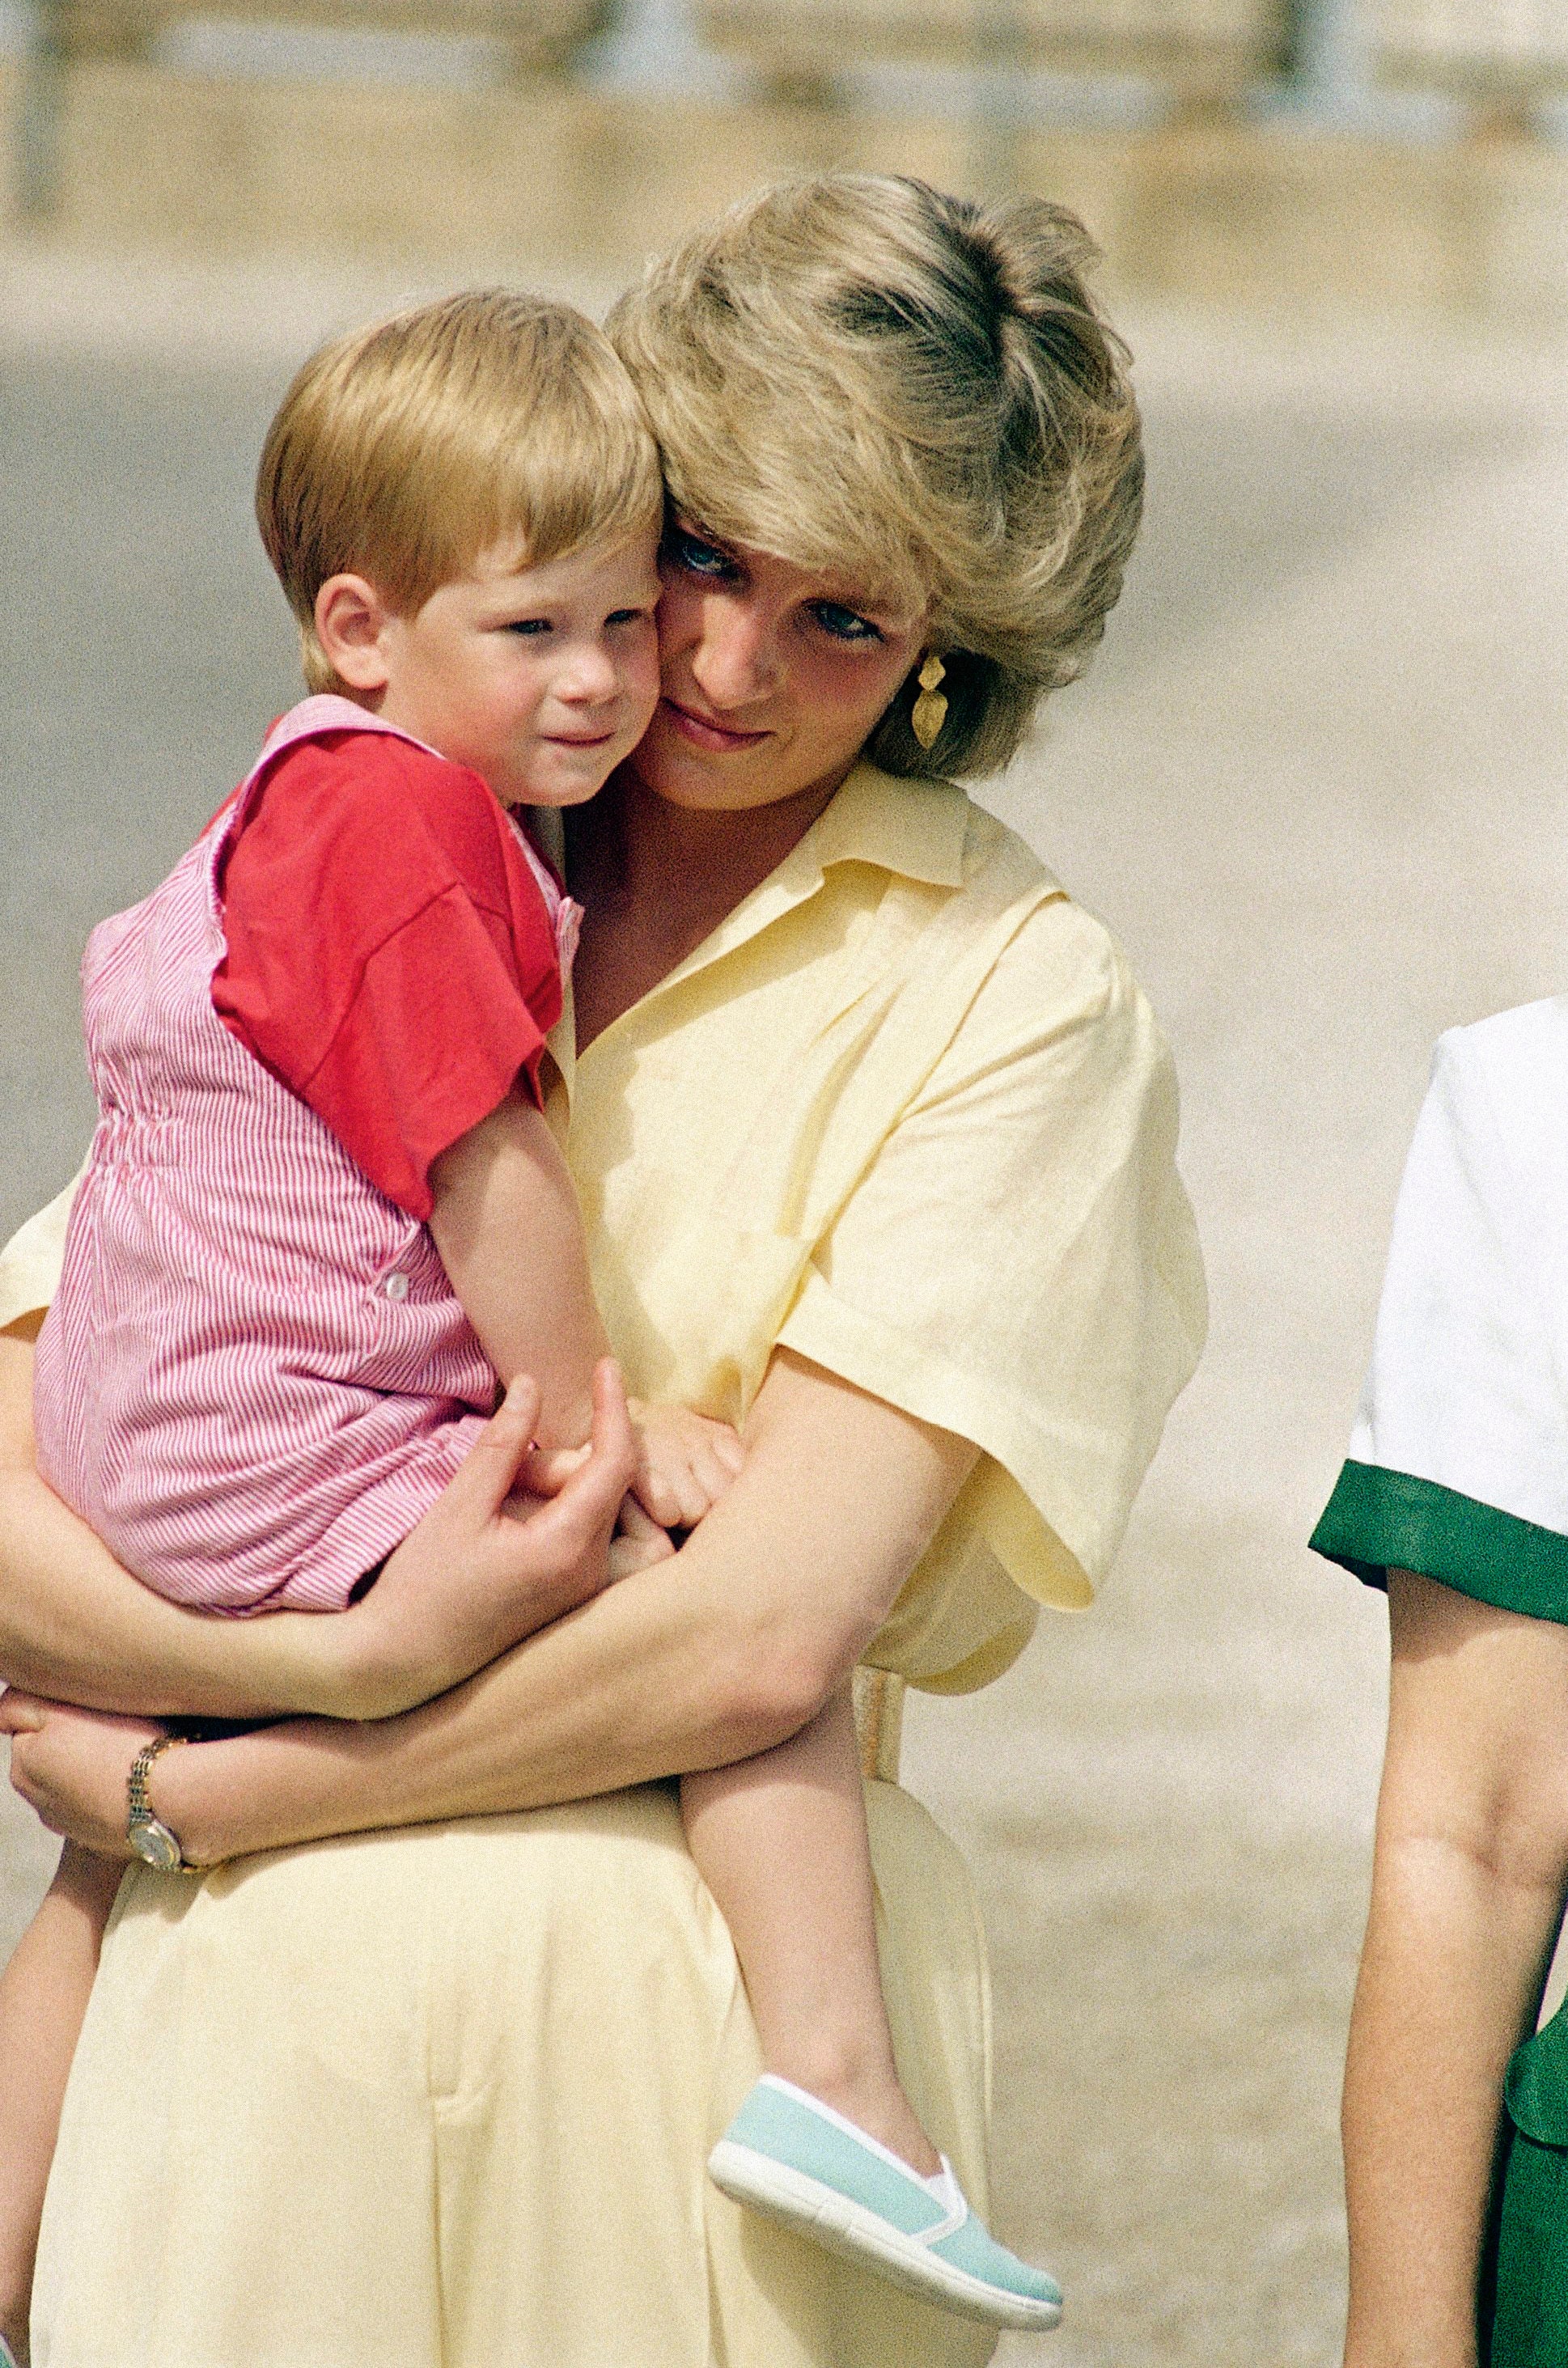 Prince Harry was 12 years old when Princess Diana died